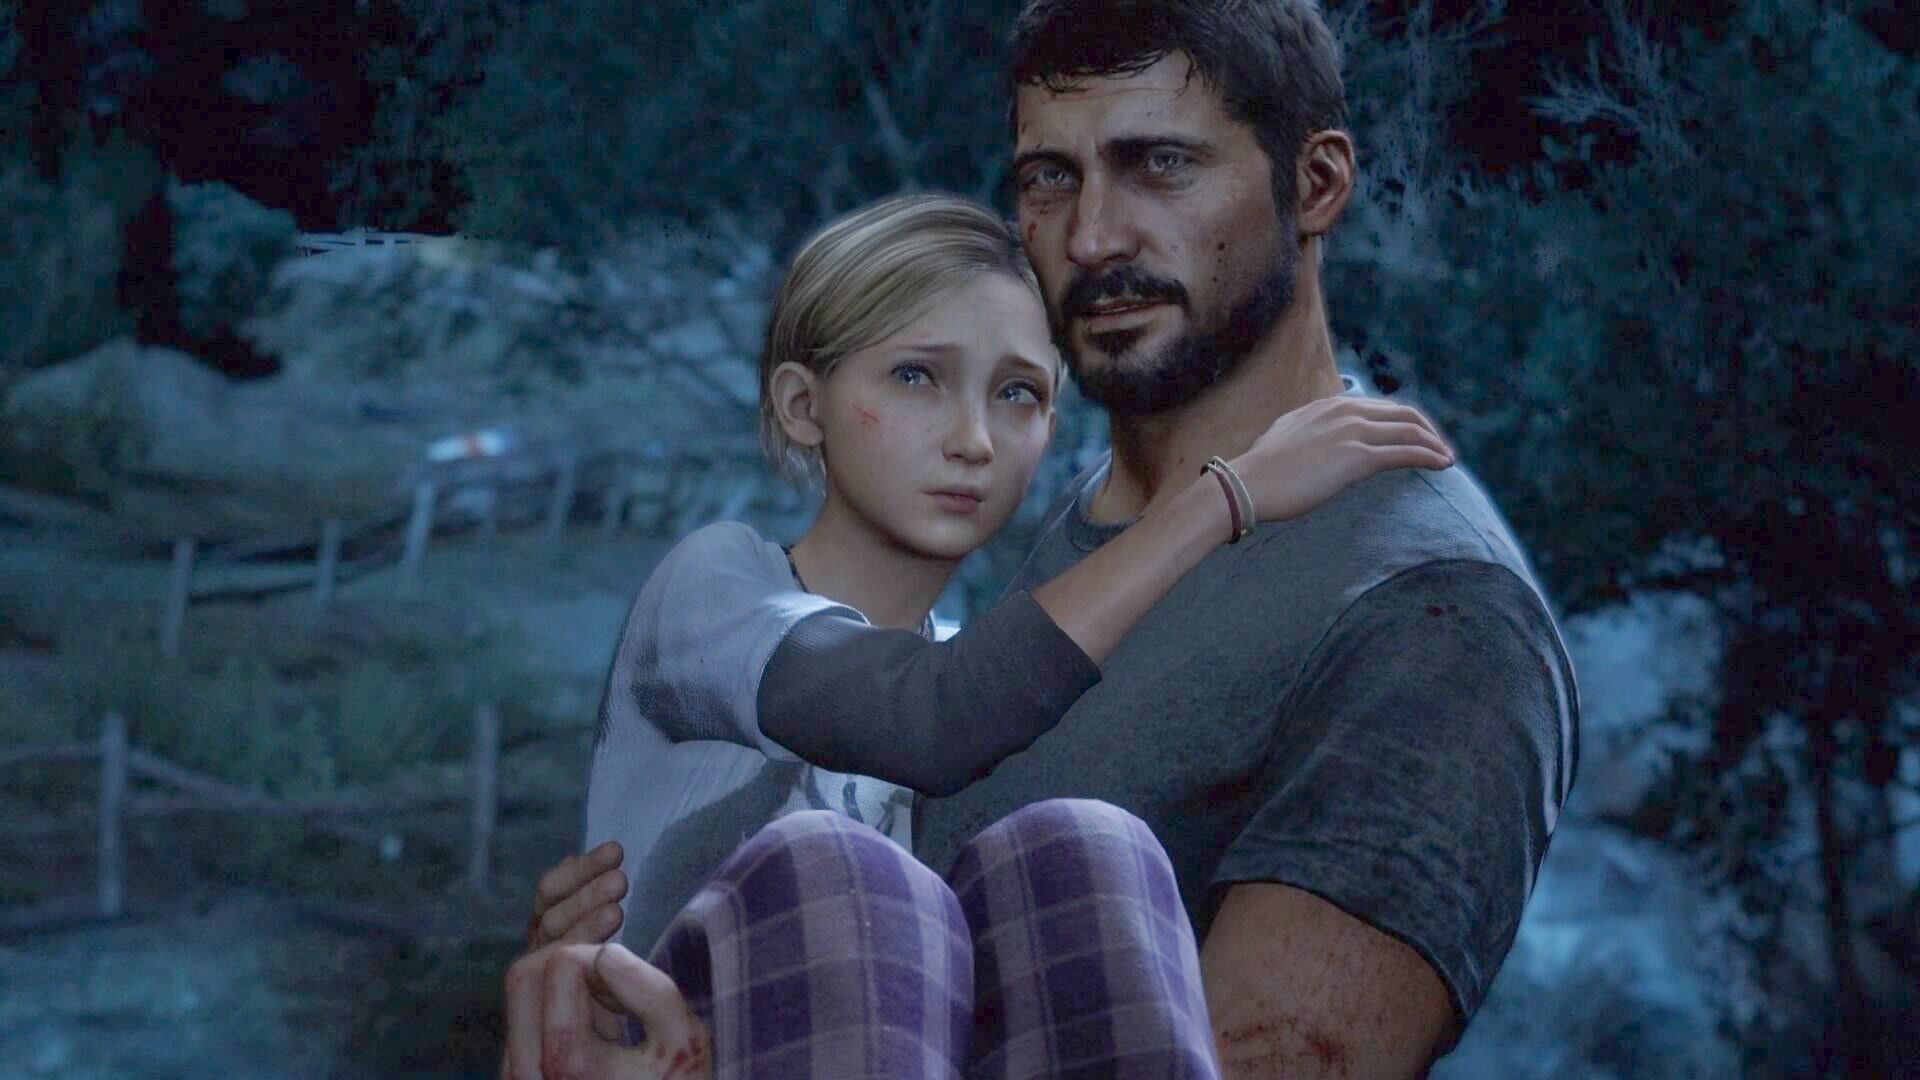 mealy-hornet264: Ellie and Sarah with Joel from the last of us